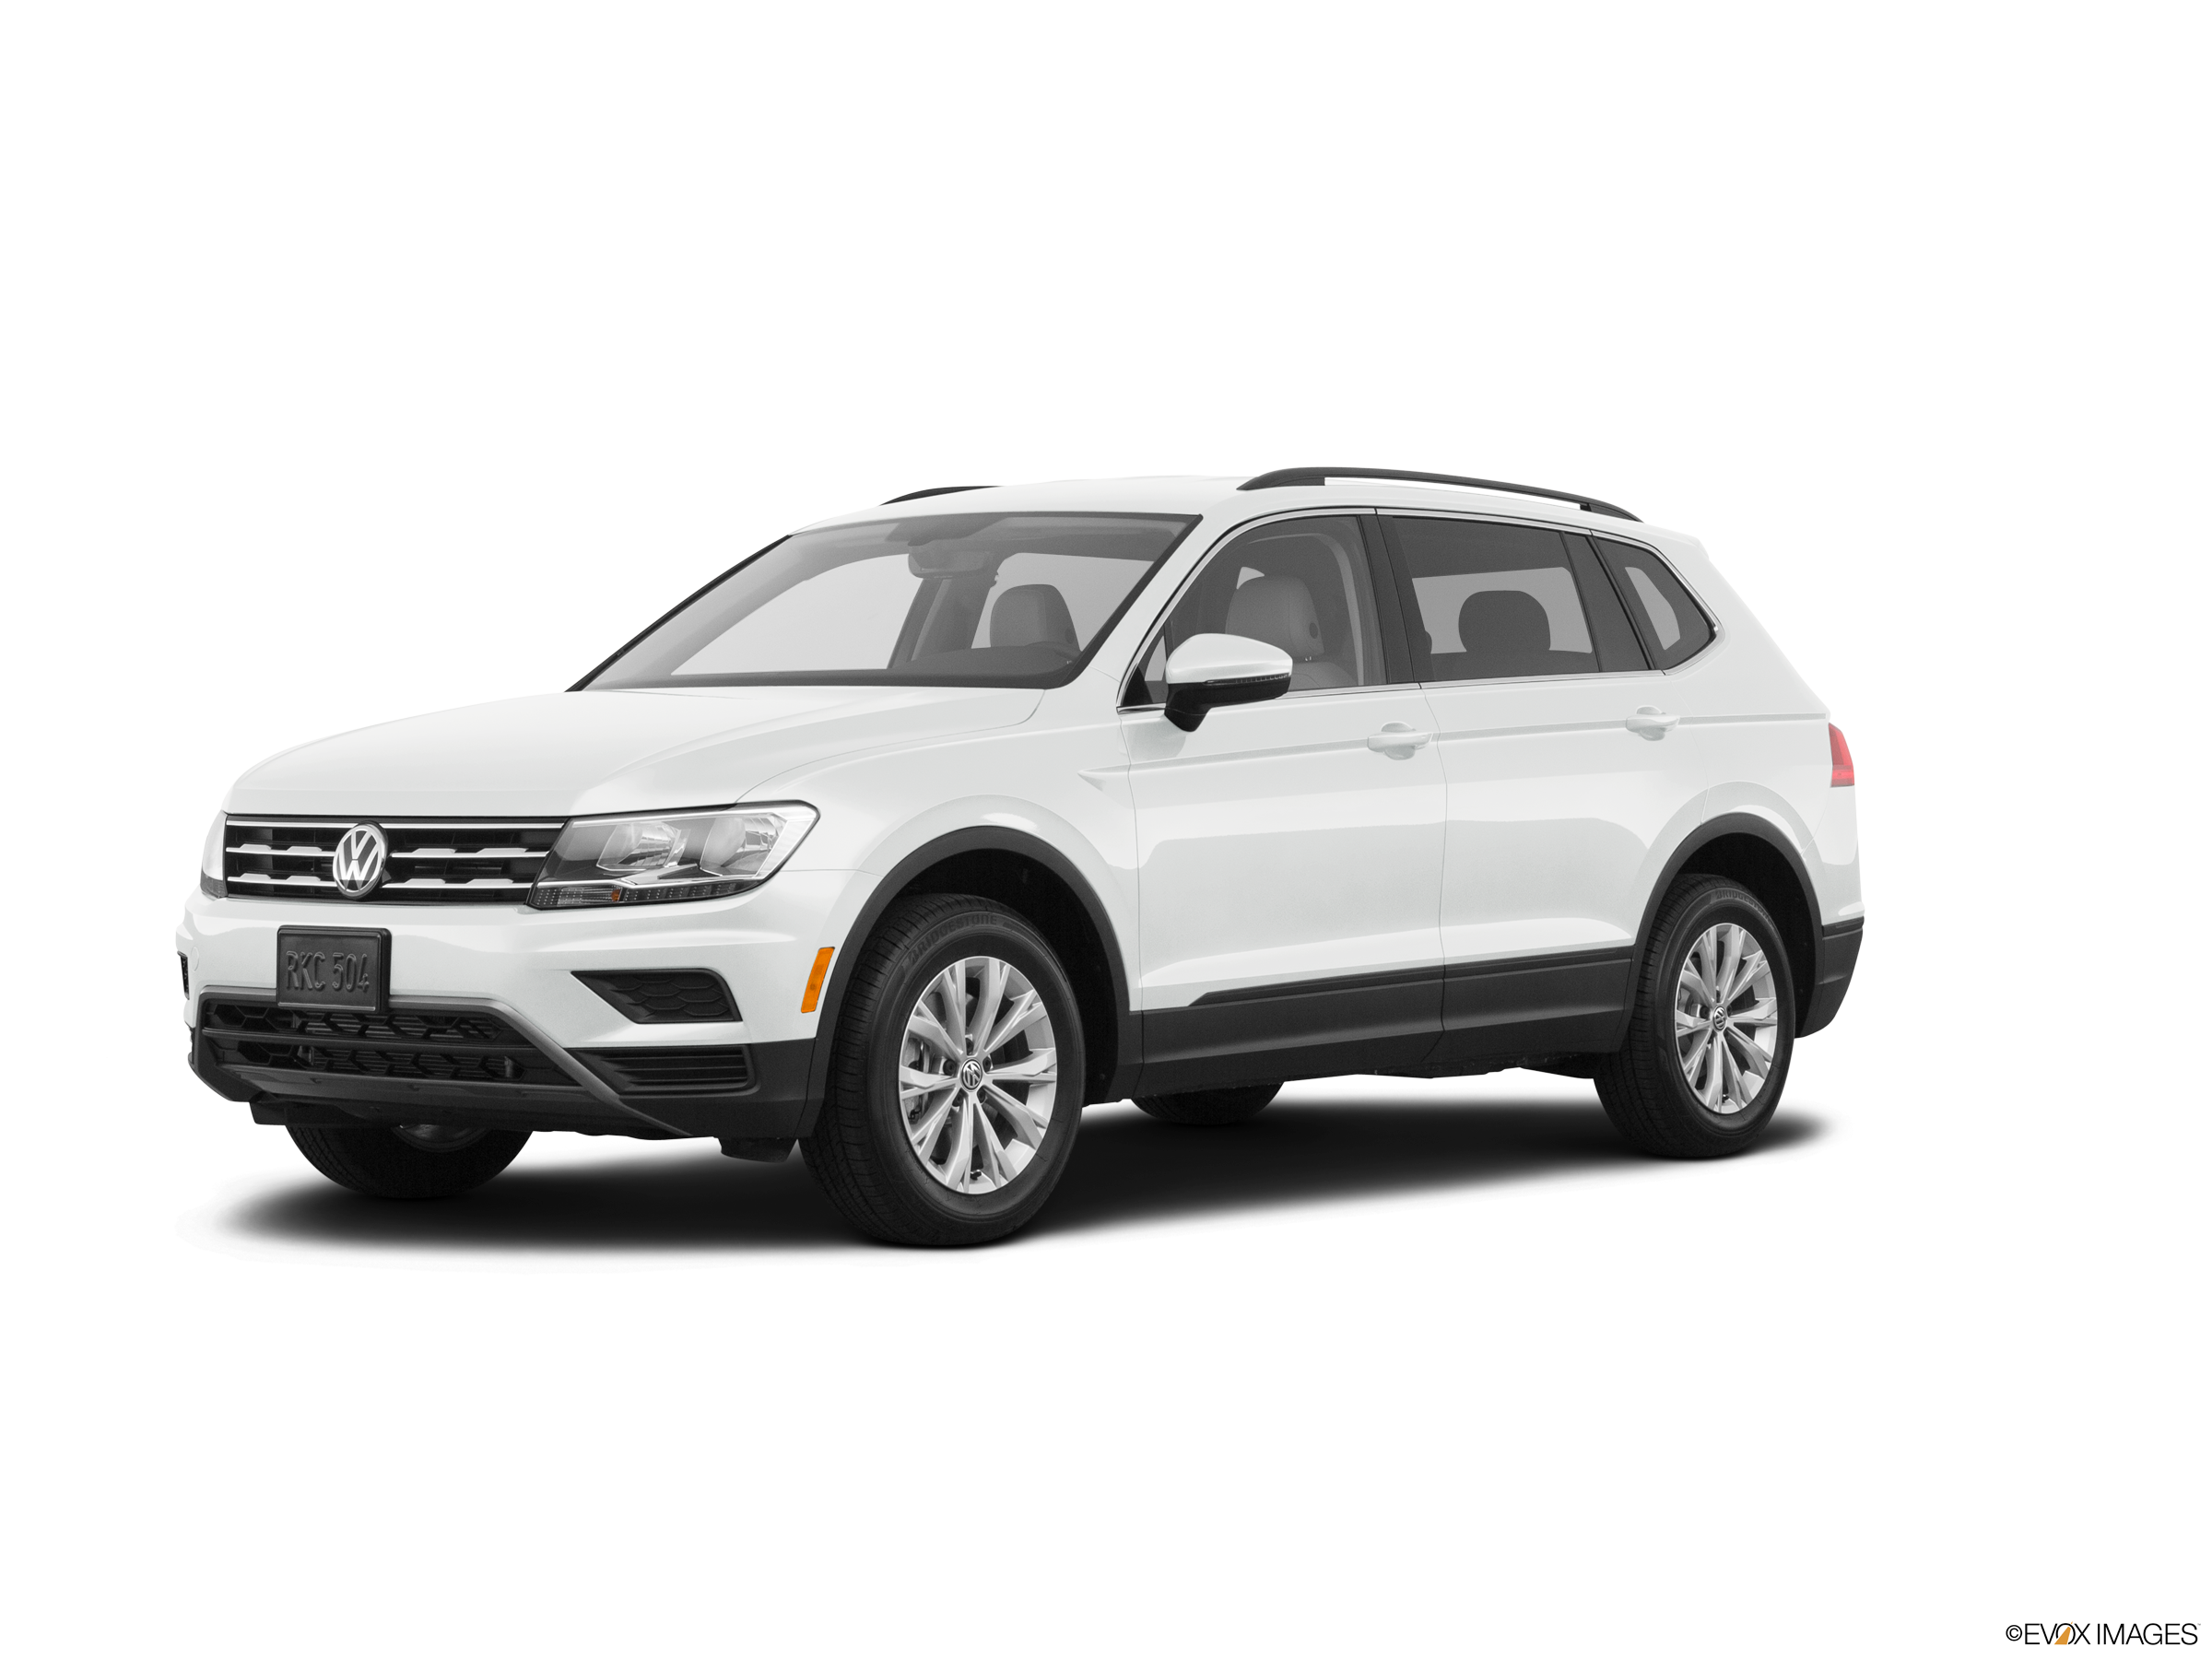 2019 Volkswagen Tiguan earns Top Safety Pick Plus, but safety